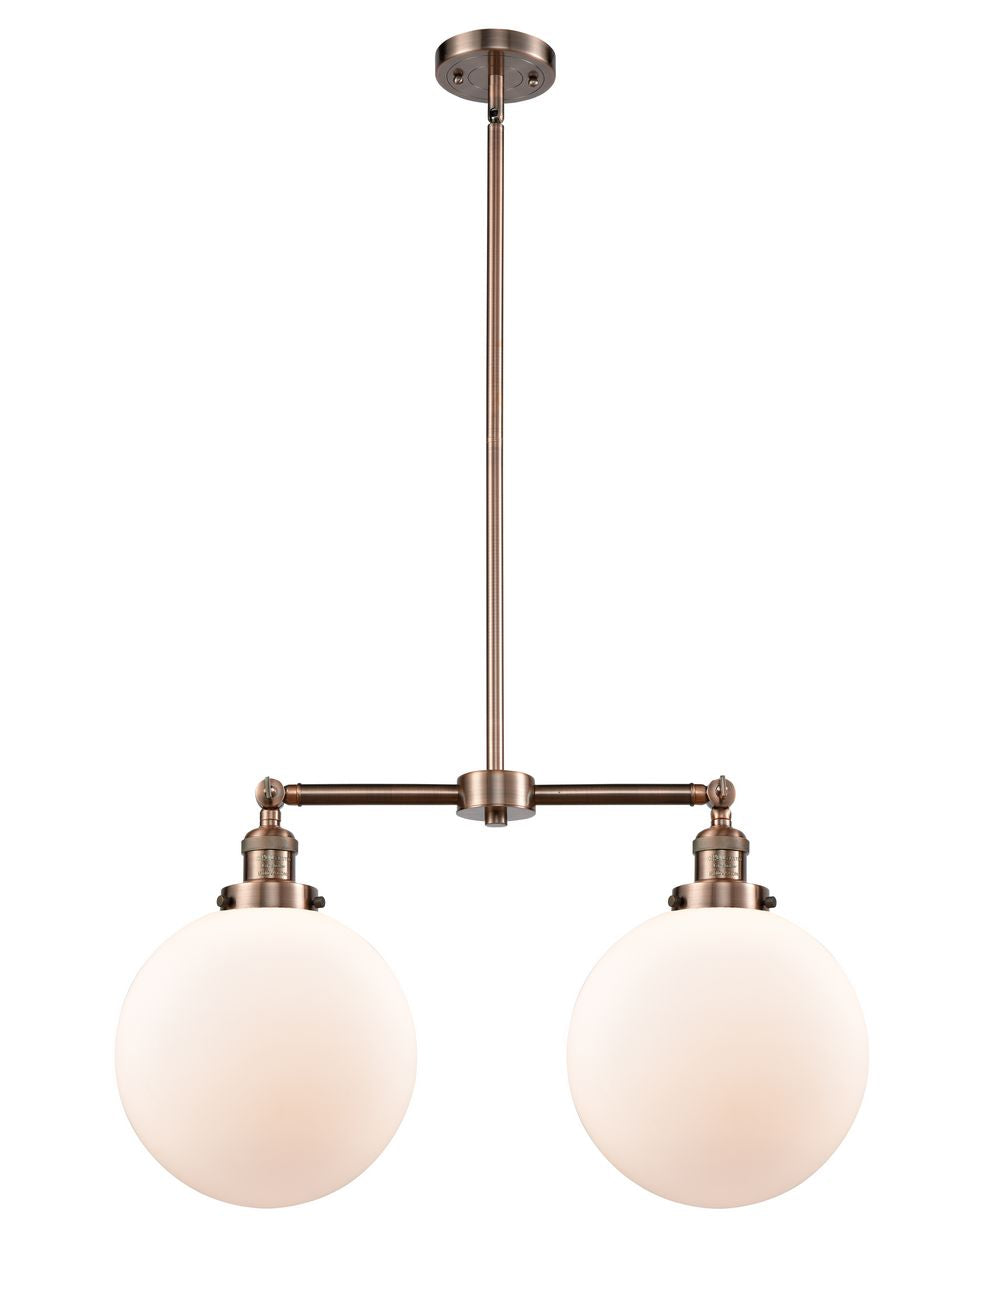 209-AC-G201-10 2-Light 25" Antique Copper Island Light - Matte White Cased Beacon Glass - LED Bulb - Dimmensions: 25 x 10 x 14<br>Minimum Height : 24.875<br>Maximum Height : 48.875 - Sloped Ceiling Compatible: Yes